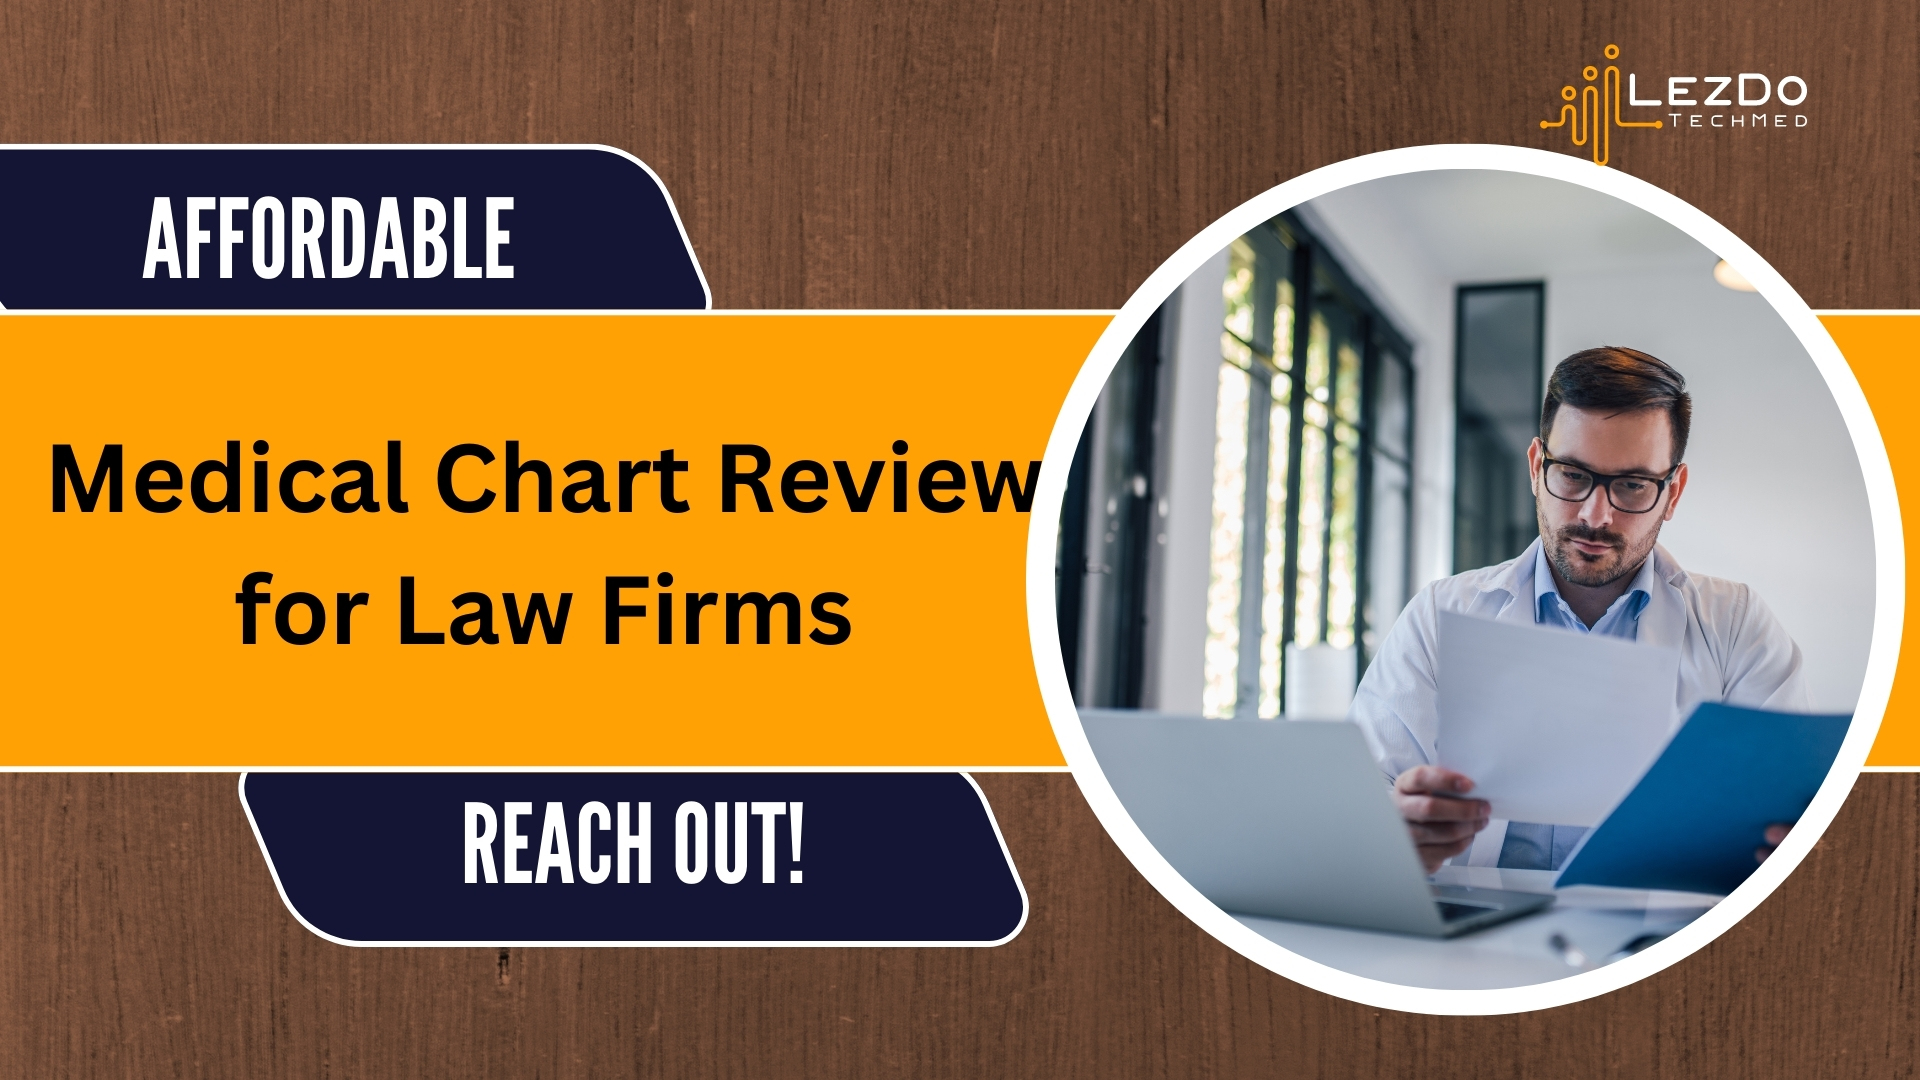 Affordable Medical Chart Review for Law Firms: Reach Out!